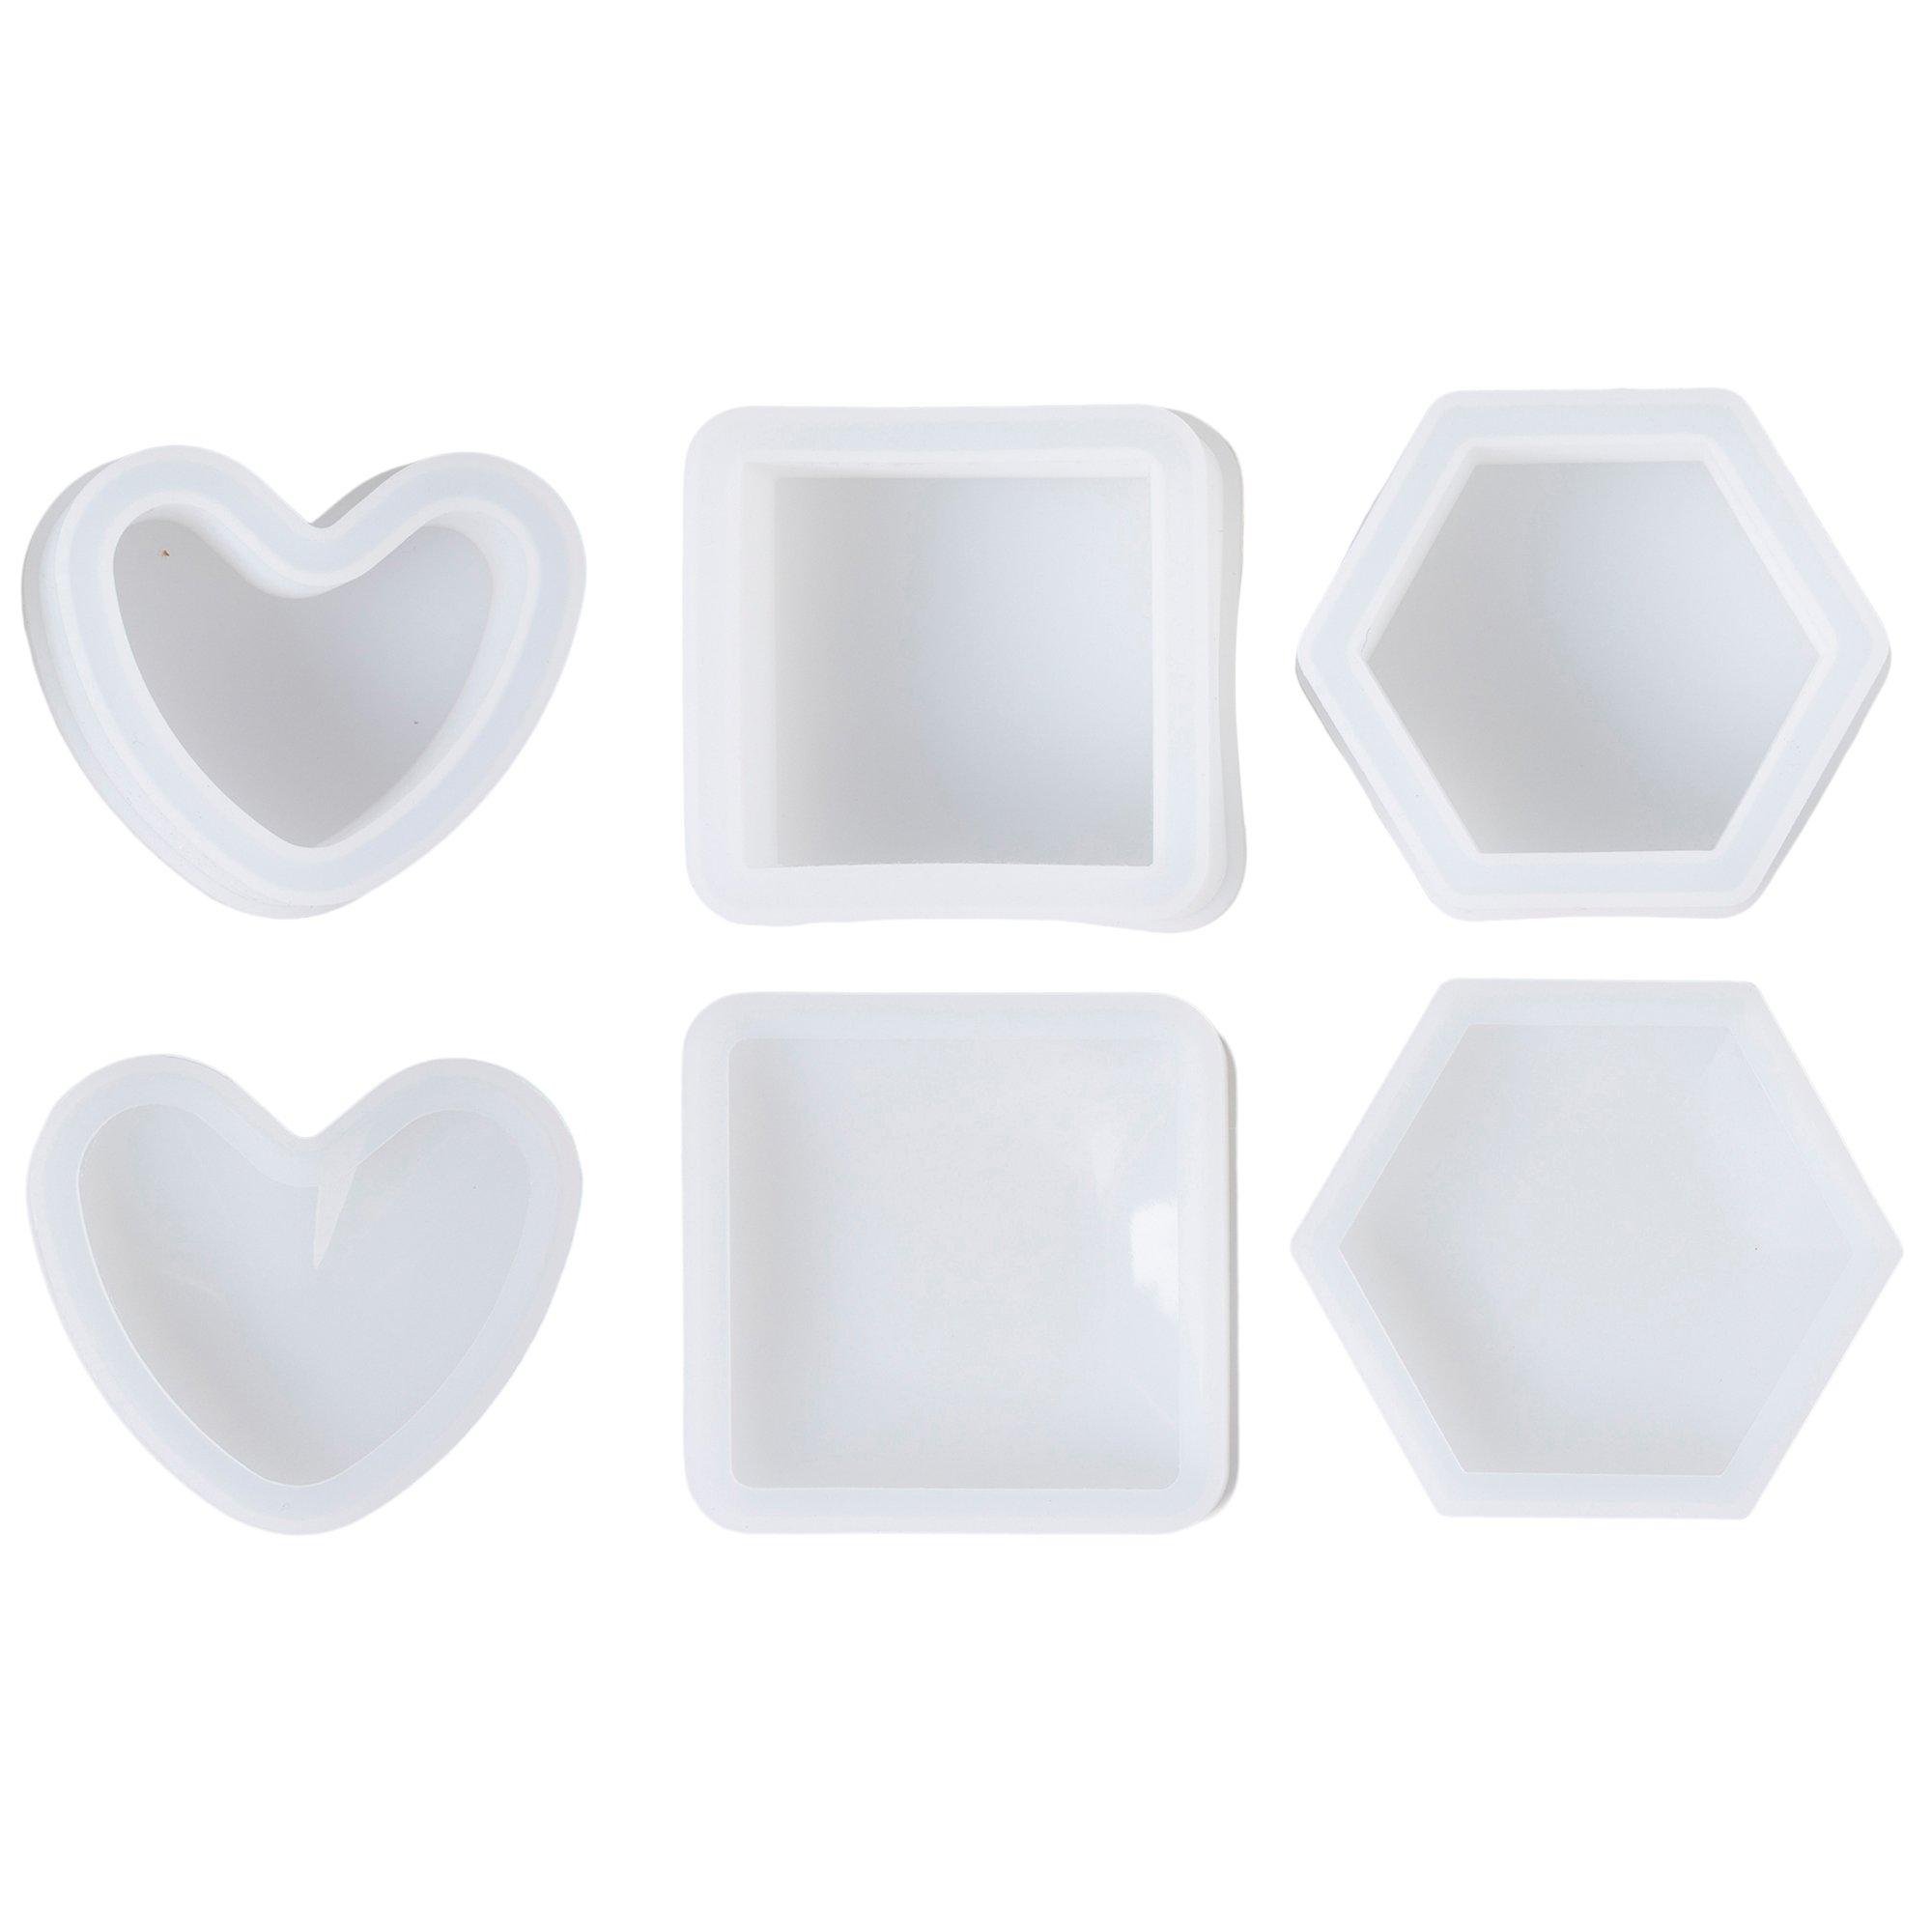 Funshowcase Hollow Pendant Silicone Resin Mold with Hole 6-Cavity, Round|Square|Rhombus